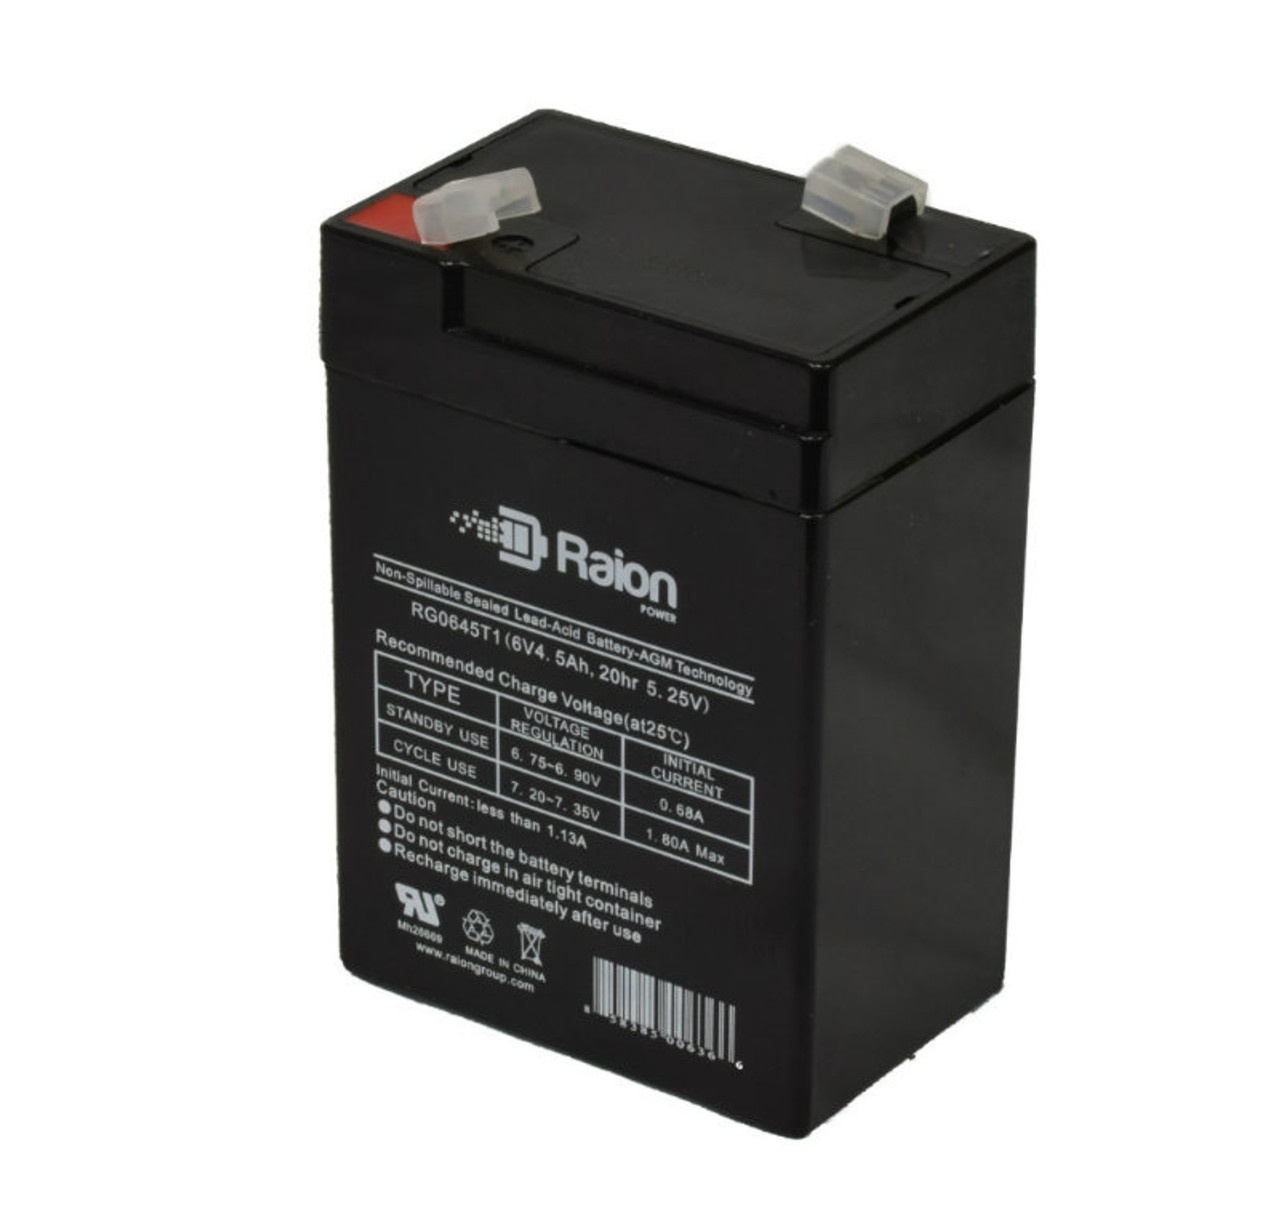 Raion Power RG0645T1 6V 4.5Ah Replacement Battery Cartridge for KAGE MF6V6Ah